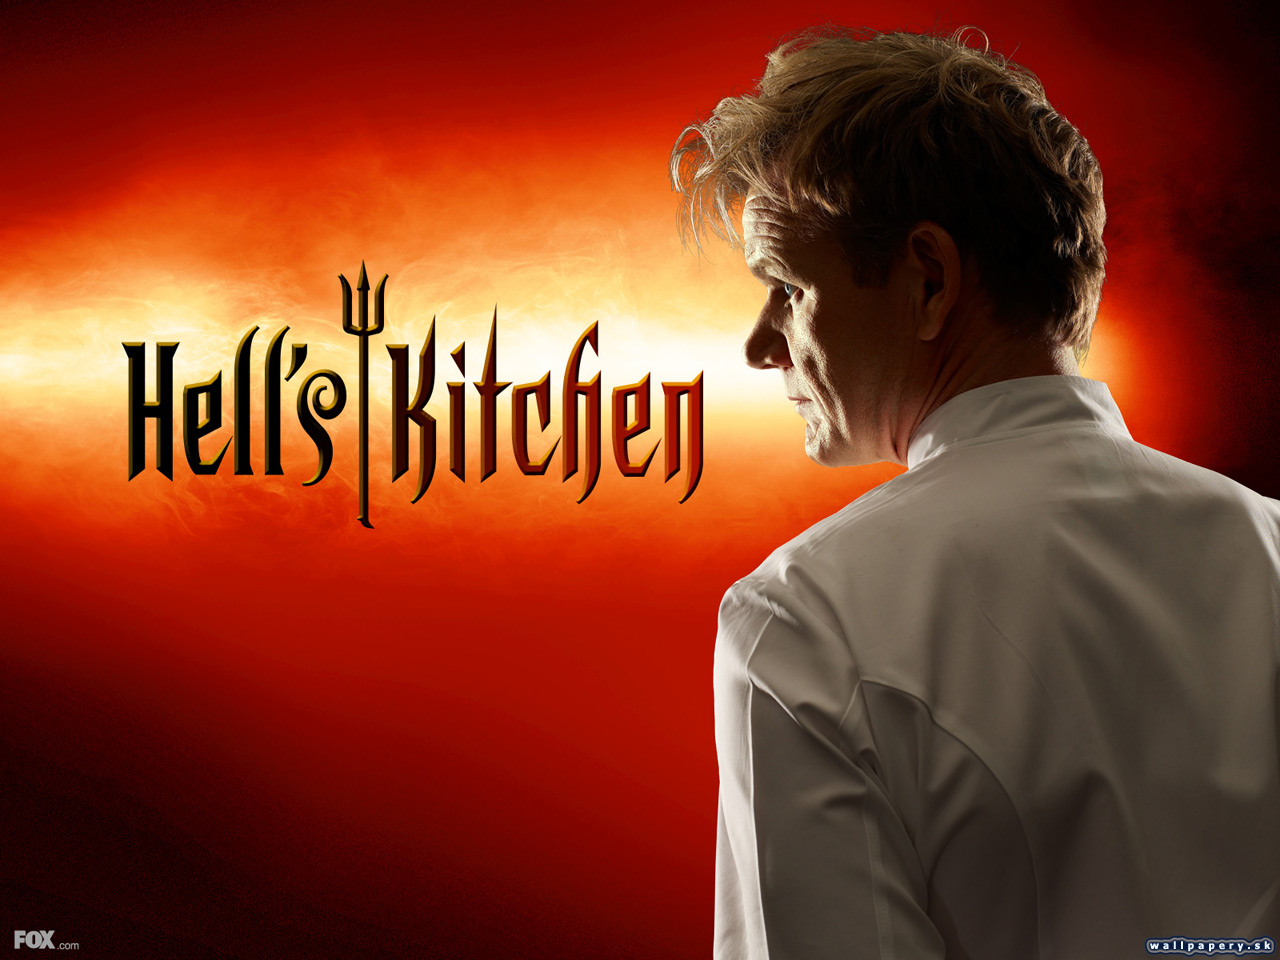 Hells Kitchen: The Video Game - wallpaper 2